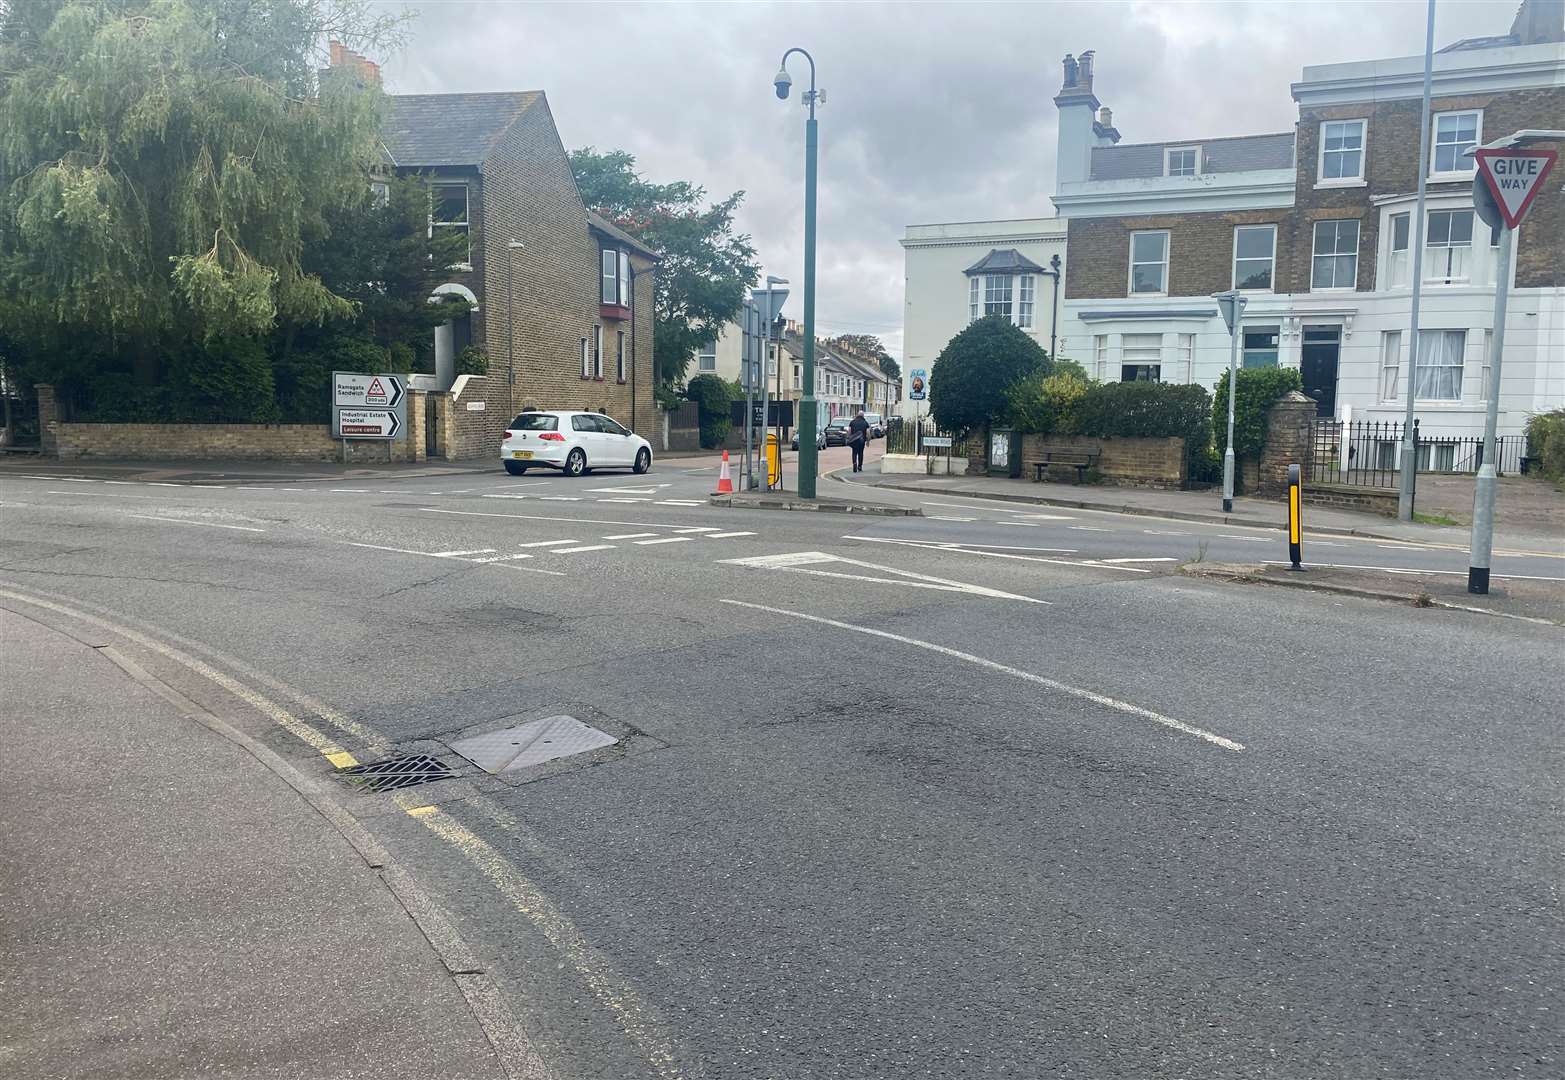 The junction with Victoria Road, Deal Castle Road and Guilford Road – close to Deal Castle – has been called one of the 'dodgiest' in Deal